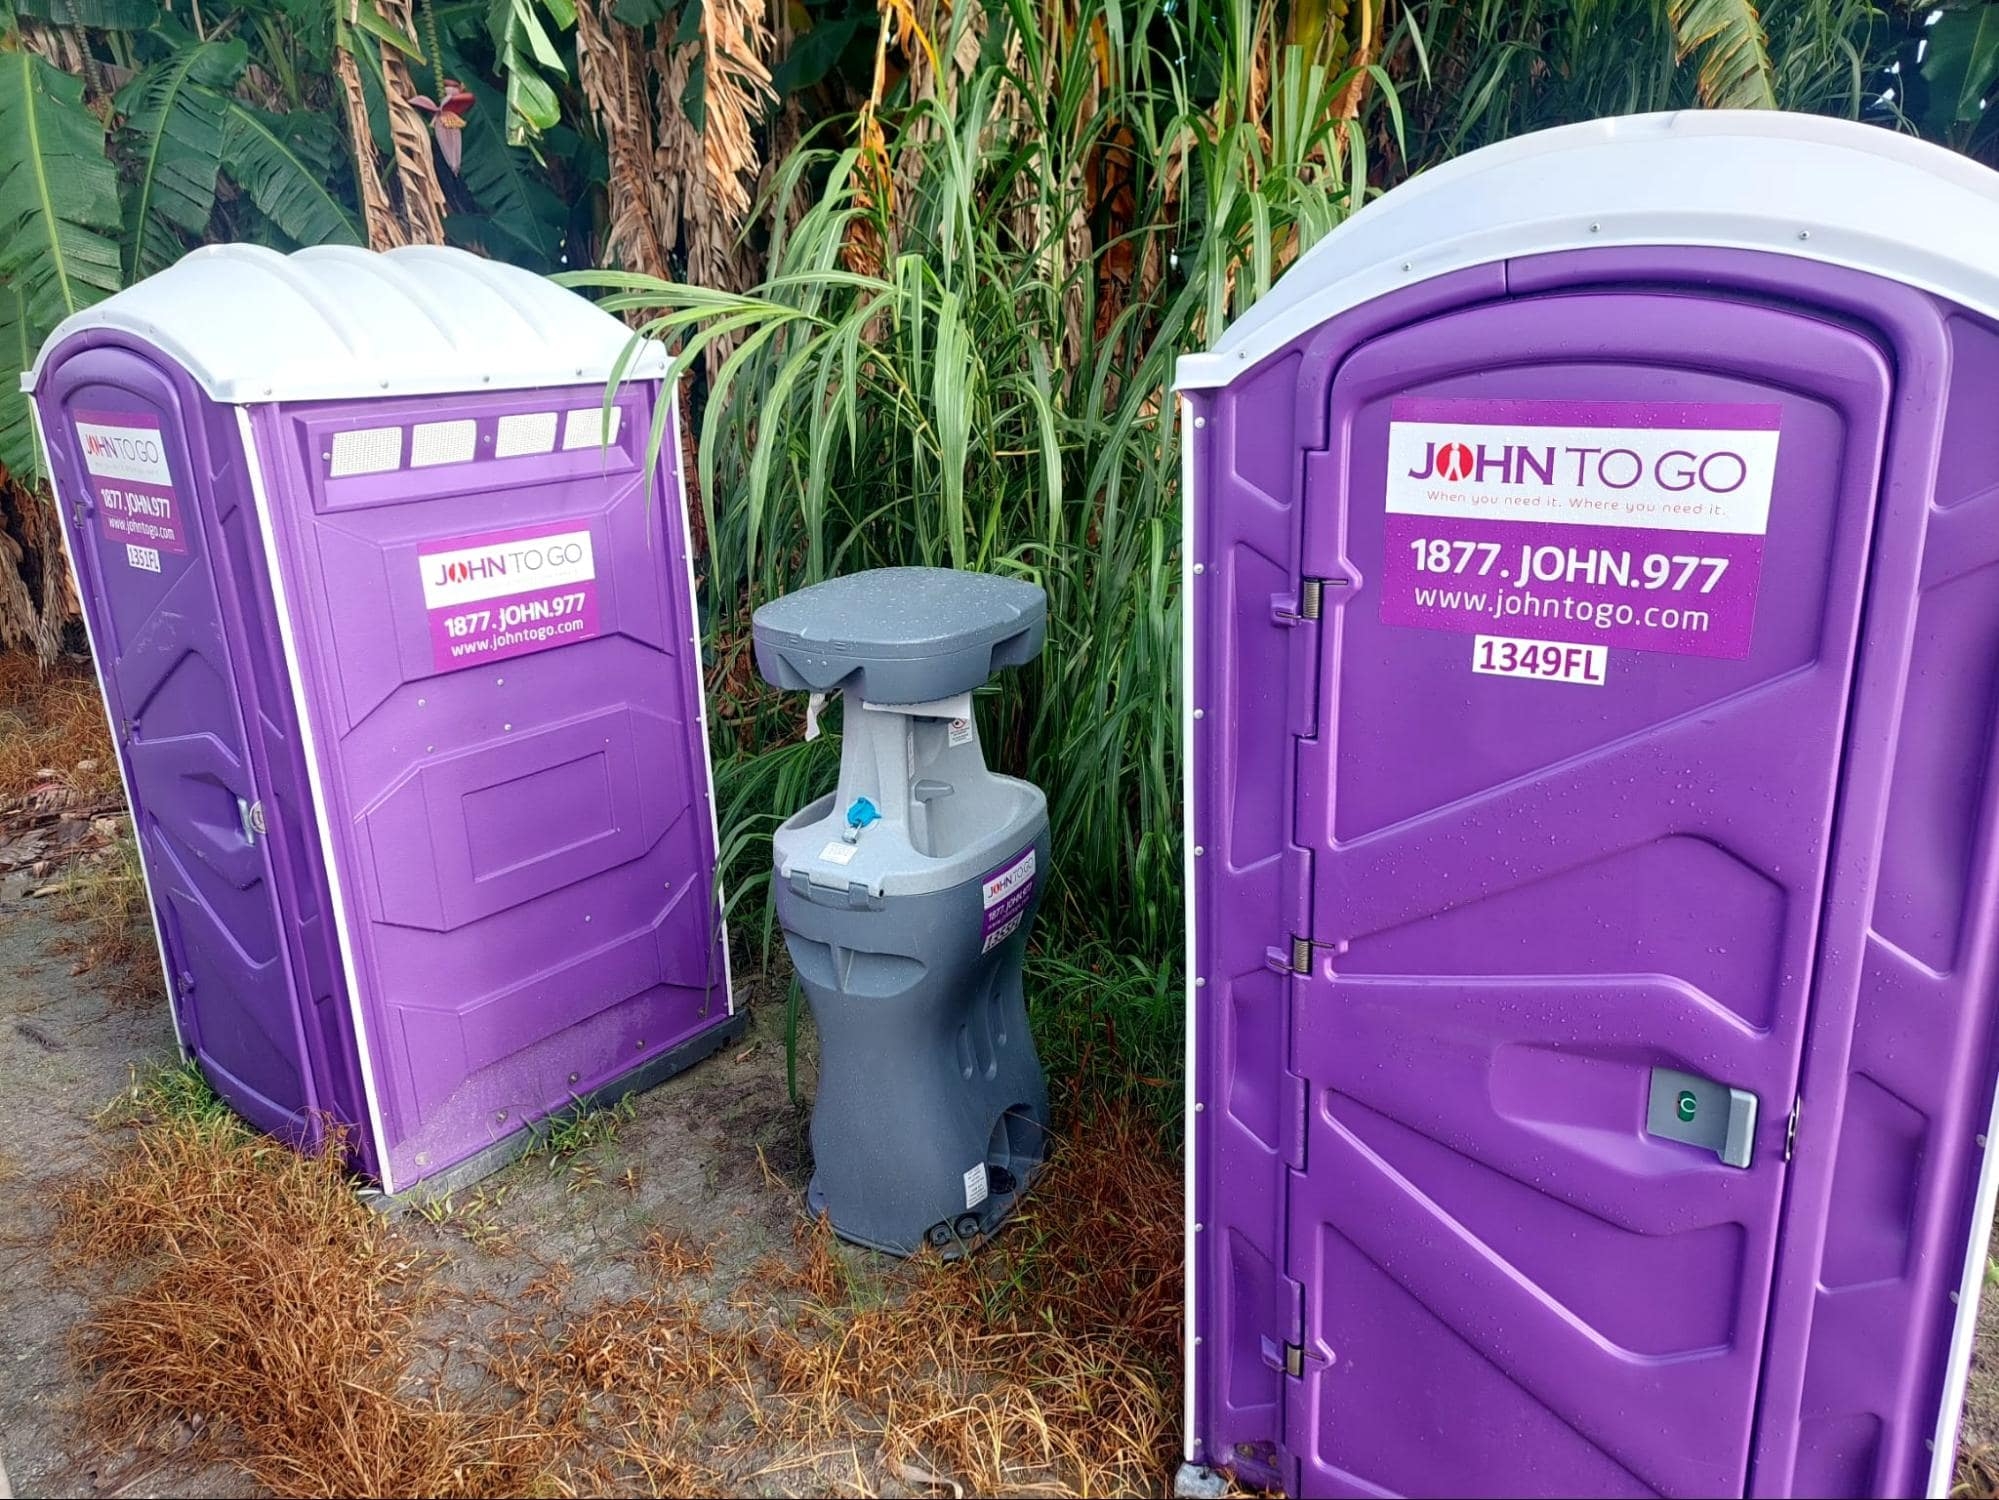 Portable hand washing station with toilets at an outdoor event